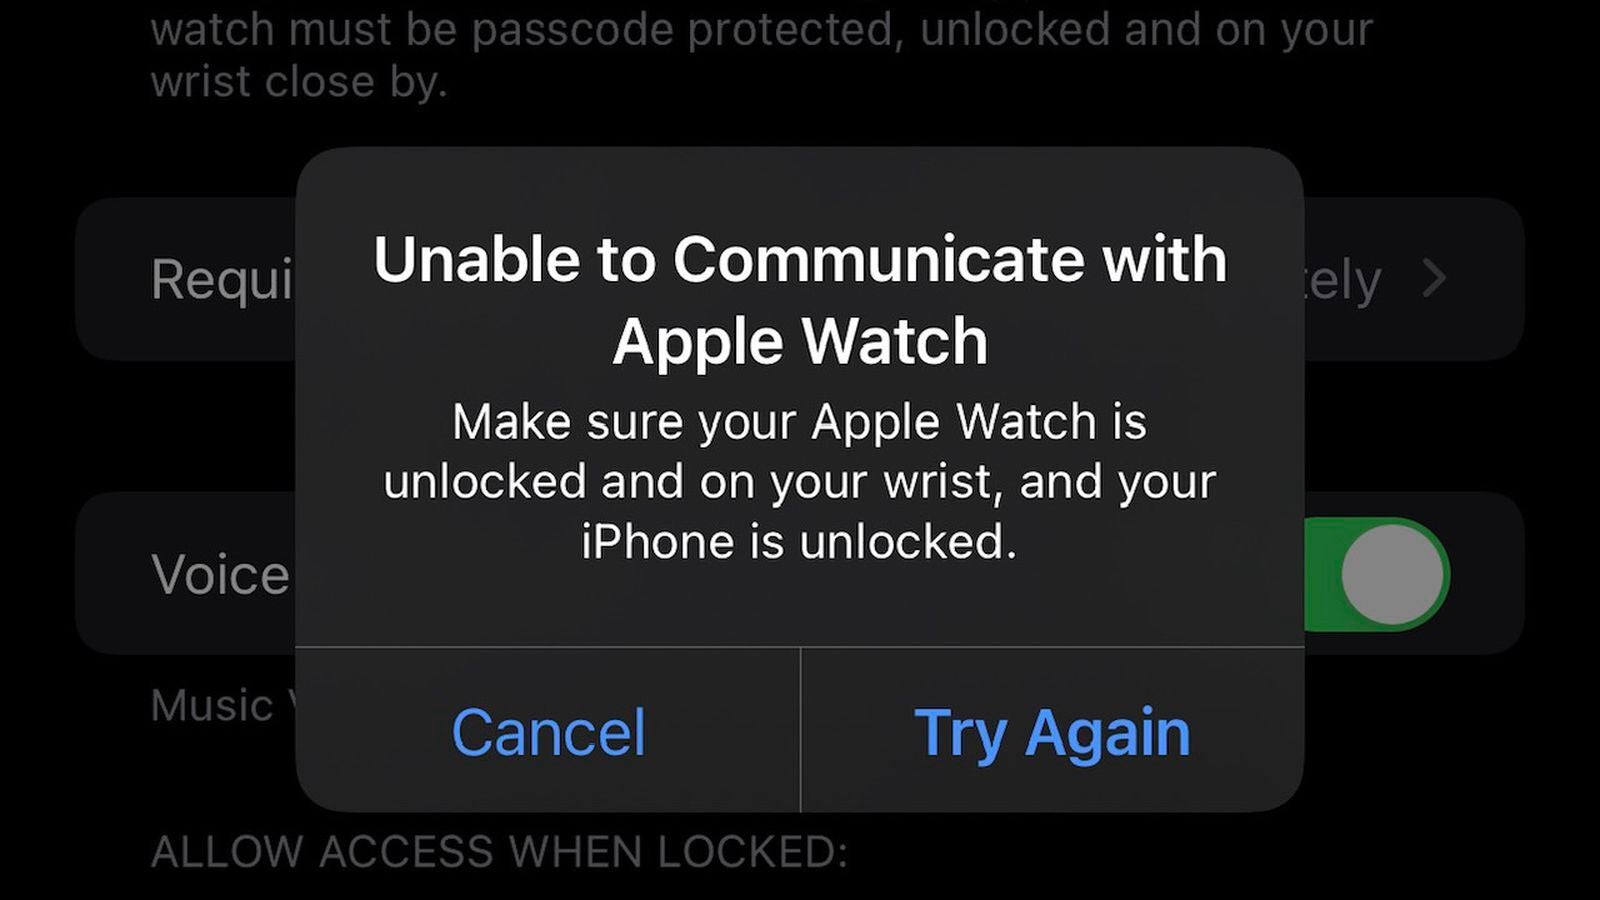 Notification sent to alert users that they can't unlock their iPhone 13 series phones with Unlock with Apple Watch - Annoying bugs are affecting the 5G iPhone 13 series and the latest iPad tablets